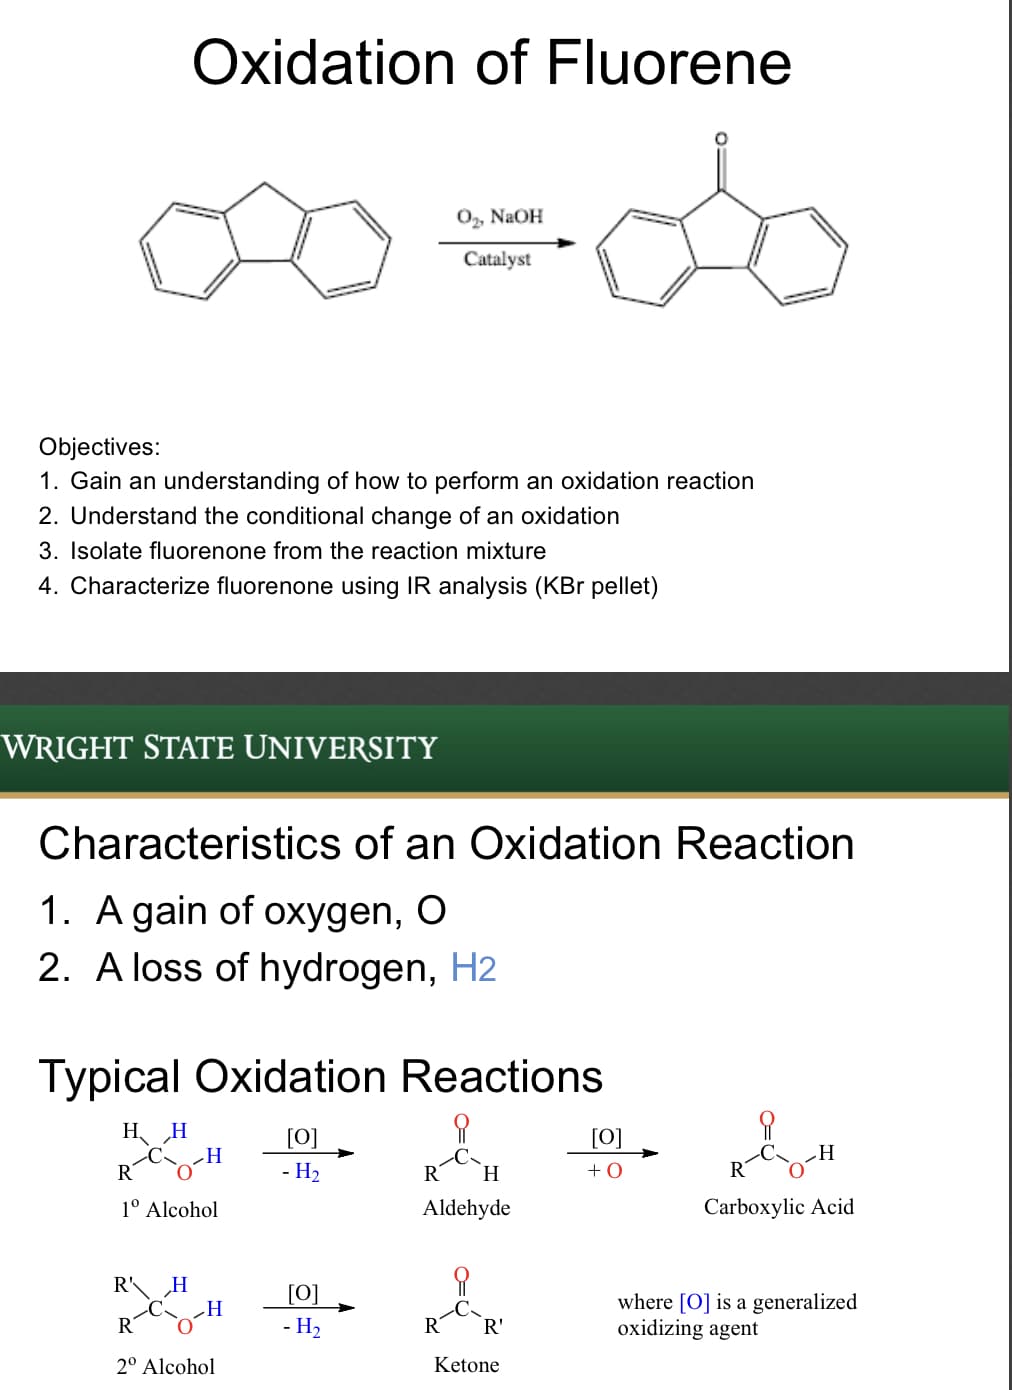 Oxidation of Fluorene
0, NaOH
Catalyst
Objectives:
1. Gain an understanding of how to perform an oxidation reaction
2. Understand the conditional change of an oxidation
3. Isolate fluorenone from the reaction mixture
4. Characterize fluorenone using IR analysis (KBr pellet)
WRIGHT STATE UNIVERSITY
Characteristics of an Oxidation Reaction
1. A gain of oxygen, O
2. A loss of hydrogen, H2
Typical Oxidation Reactions
H H
[0]
[0]
R
- H2
R
H.
+0
R
1° Alcohol
Aldehyde
Carboxylic Acid
R'
„H
H
[0]
where [O] is a generalized
oxidizing agent
R
- H2
R
R'
2° Alcohol
Ketone
